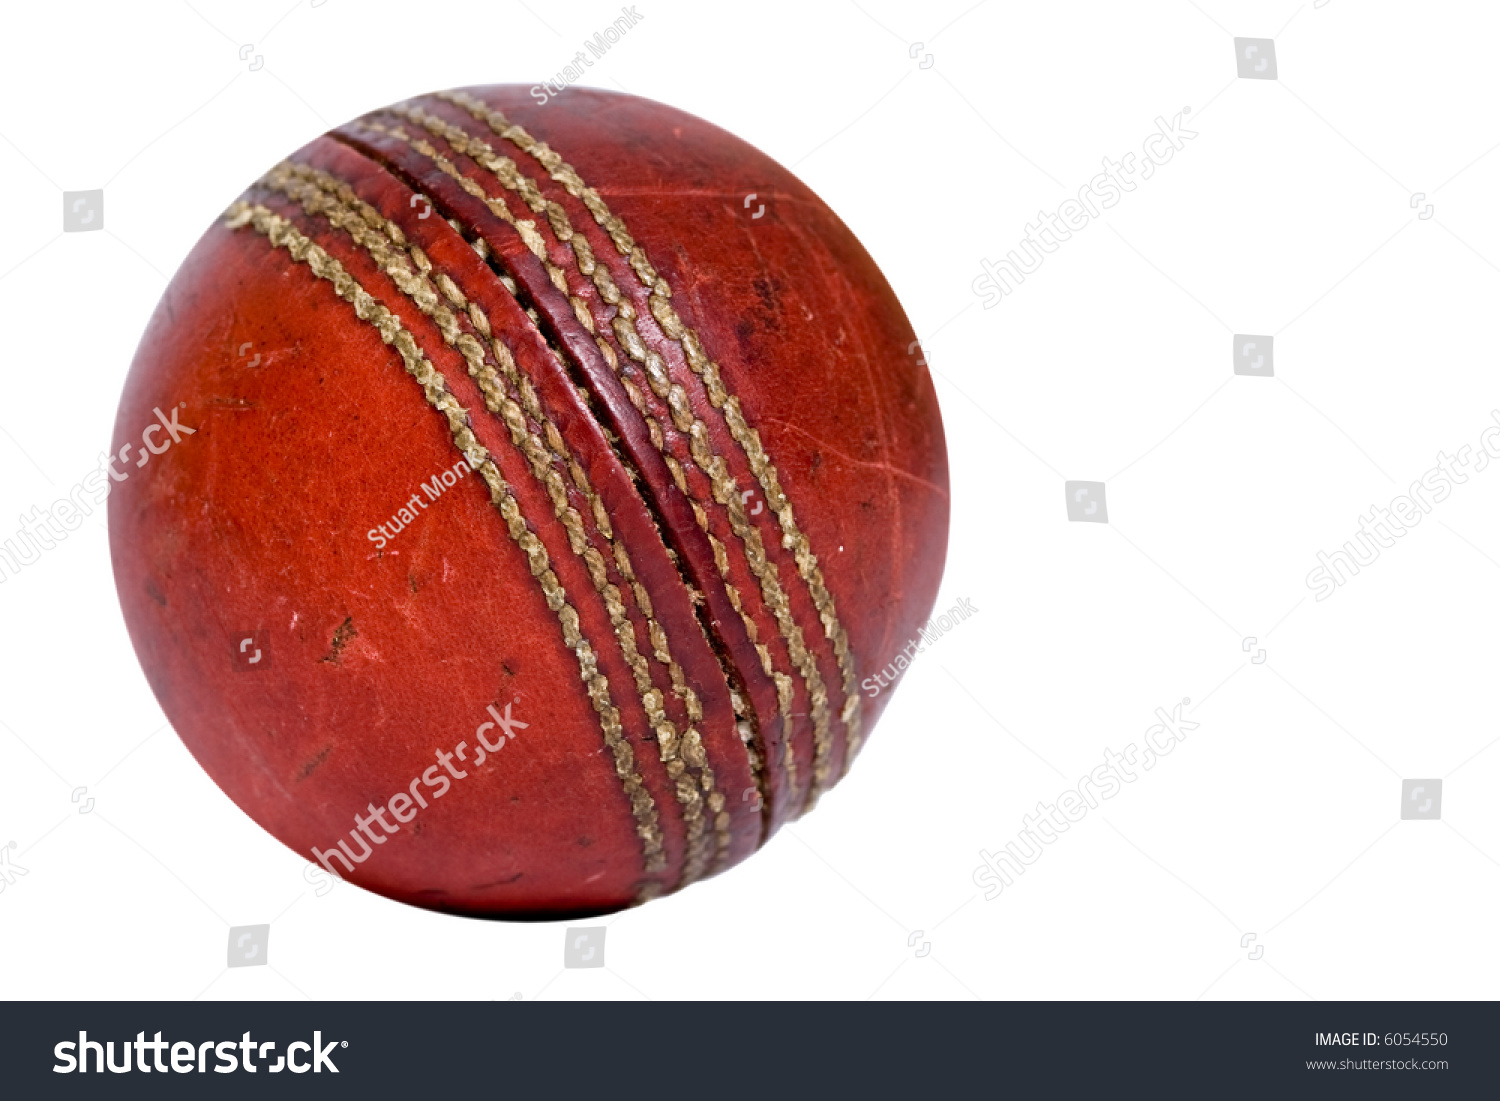 Old cricket ball isolated on white background #6054550